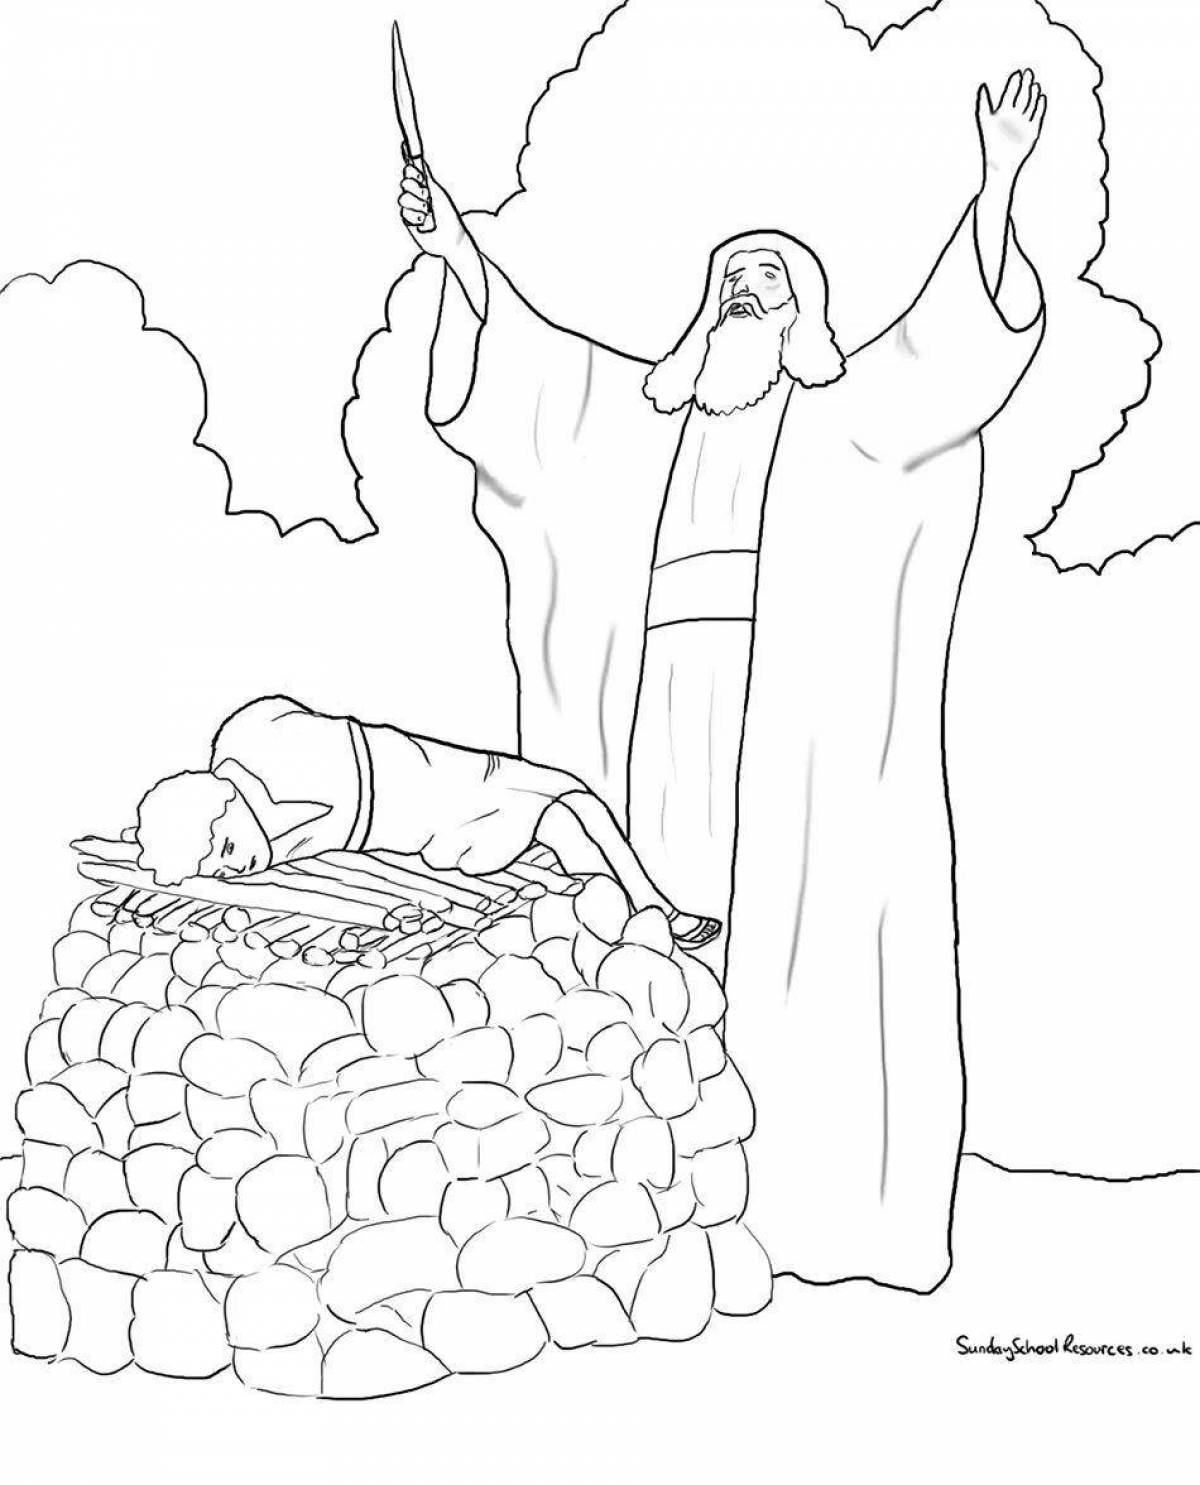 Charming bible coloring book illustration